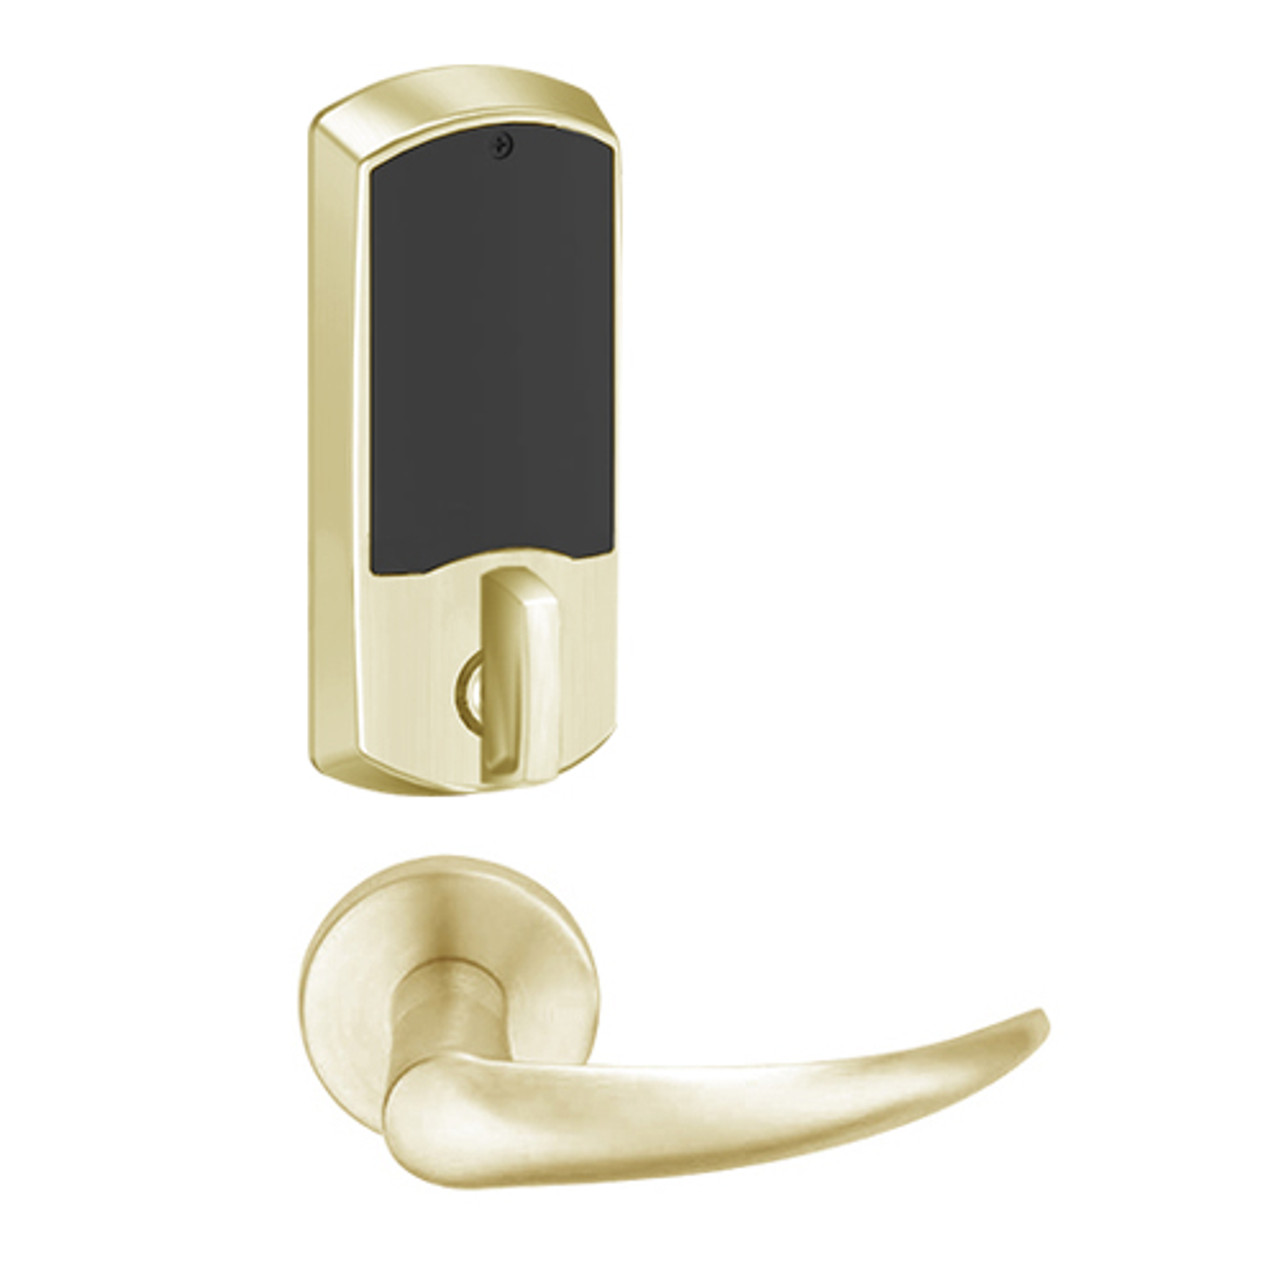 LEMD-GRW-L-OME-606-00B Schlage Less Cylinder Privacy/Apartment Wireless Greenwich Mortise Deadbolt Lock with LED and Omega Lever in Satin Brass